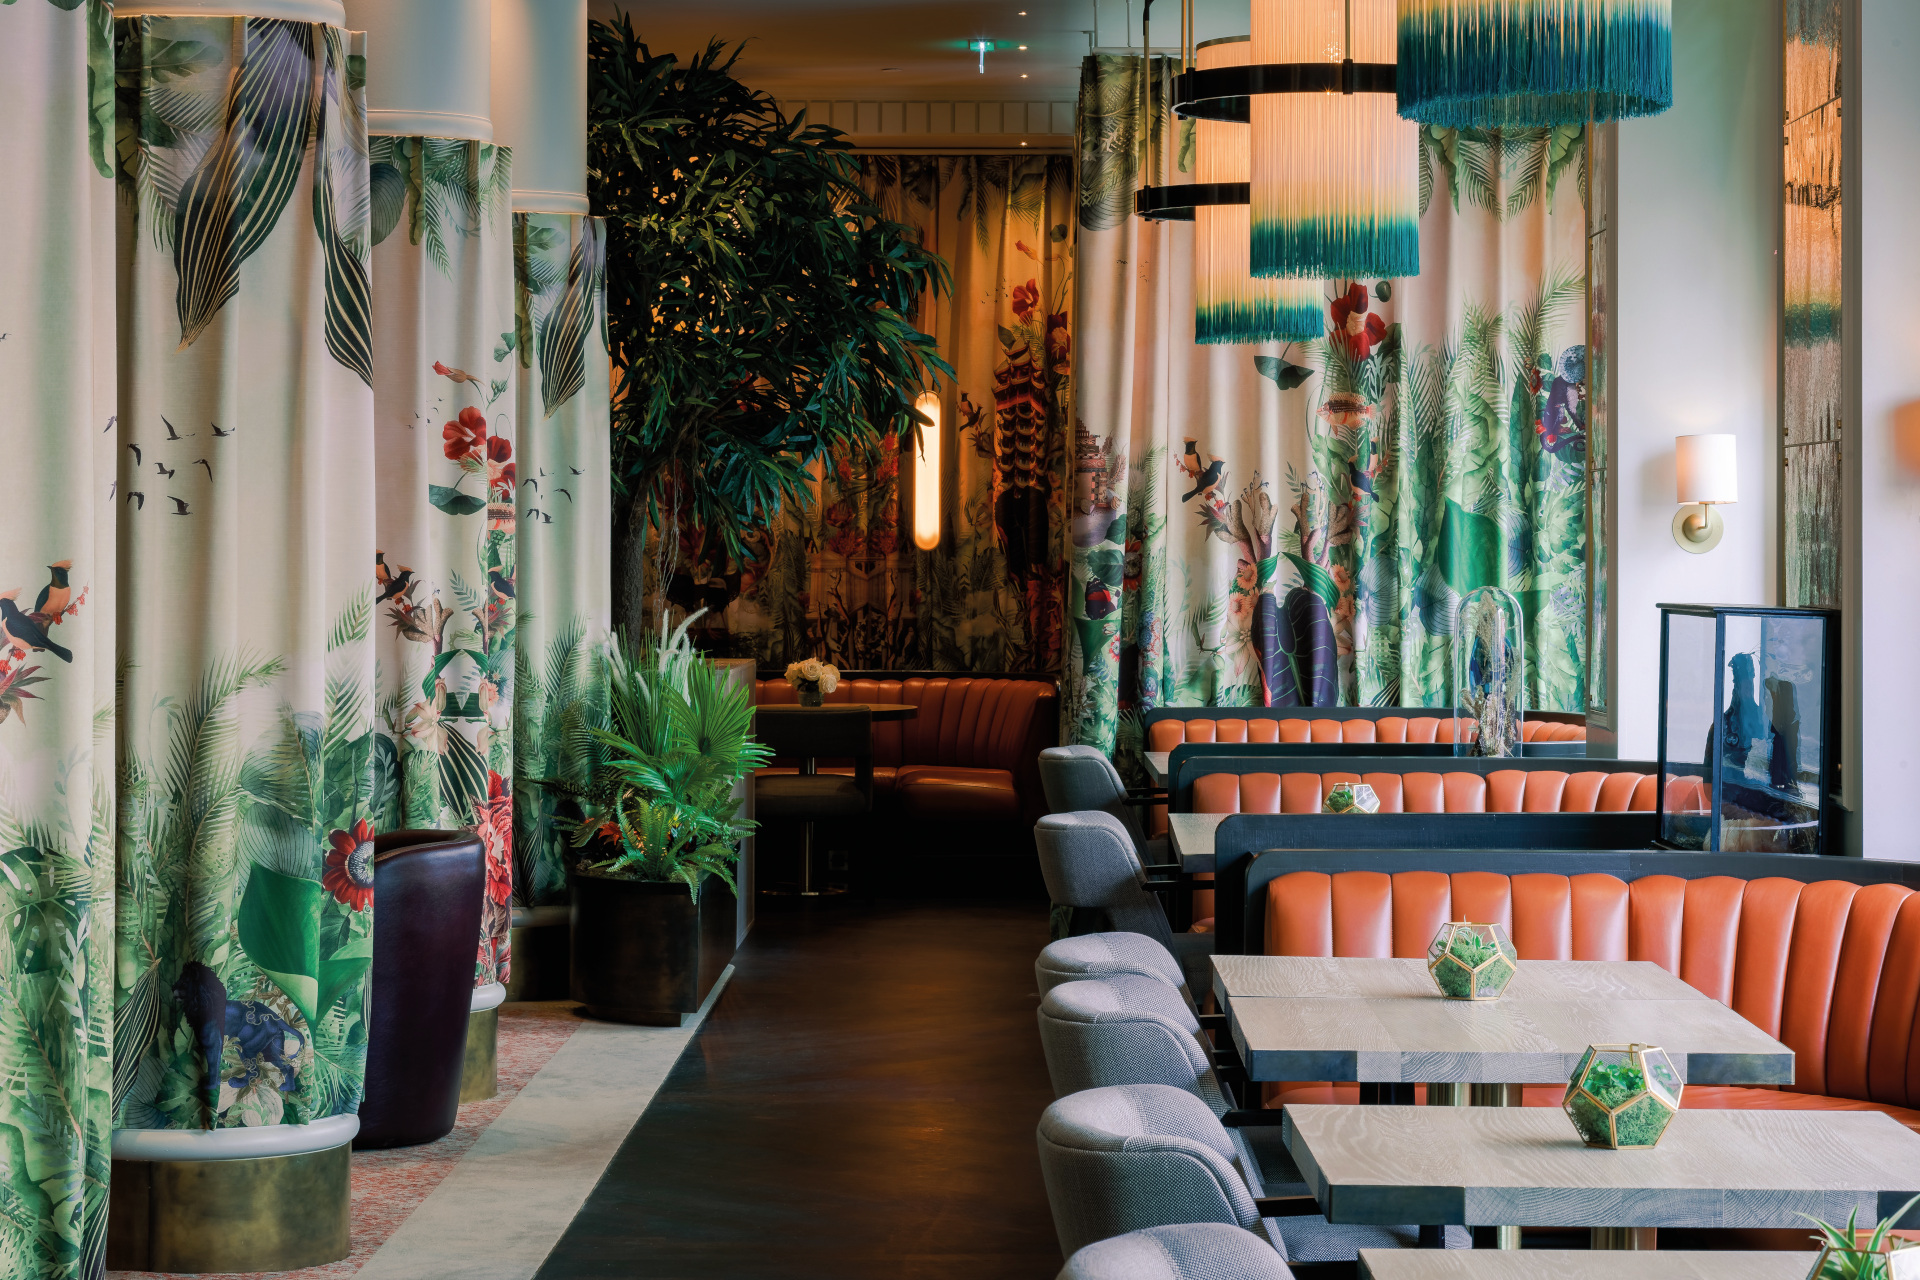 Botanical themed restaurant with floral patterned curtains